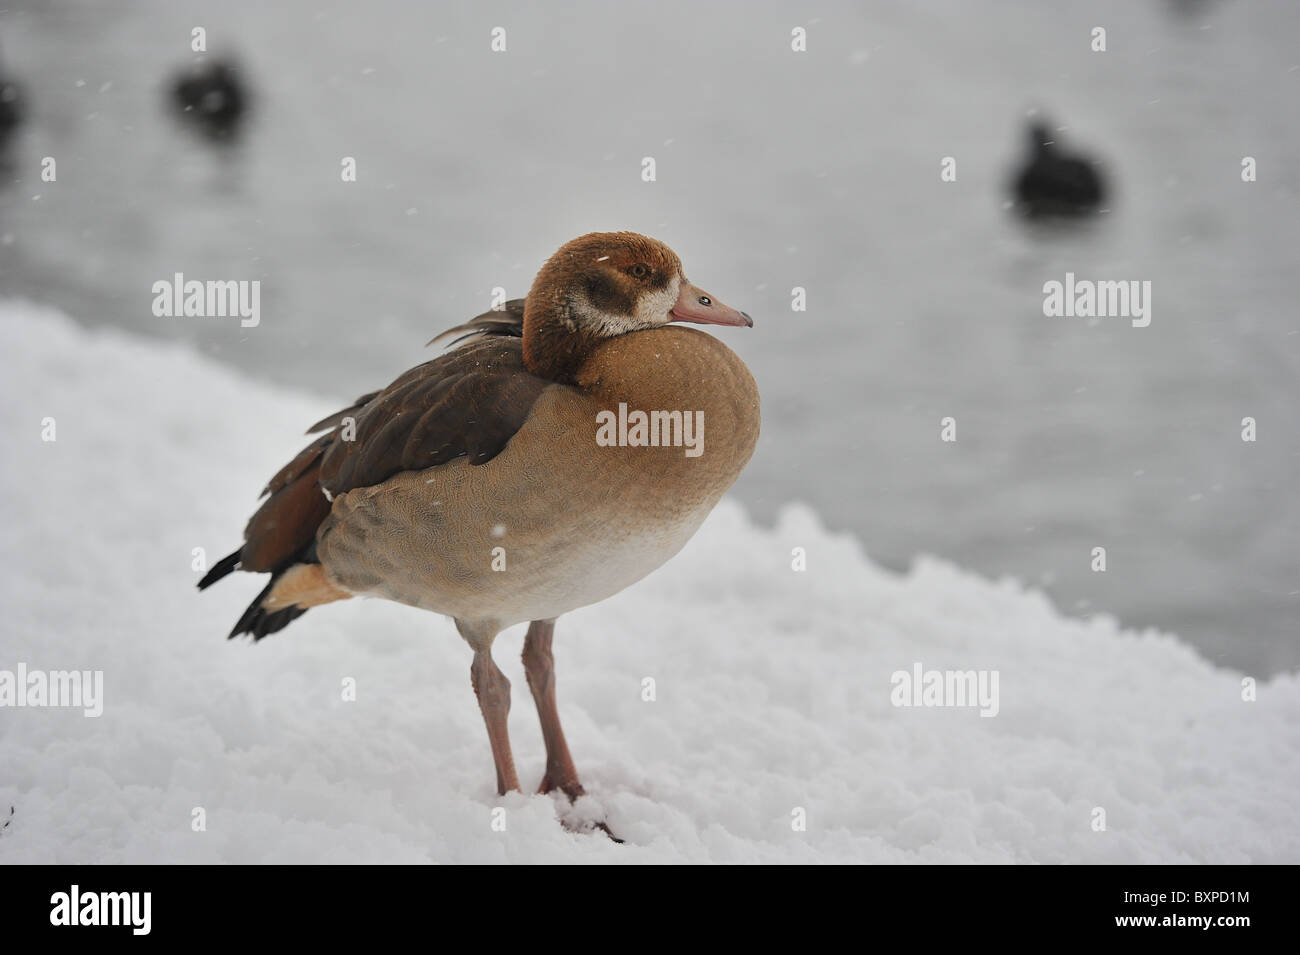 Egyptian goose - Nil goose (Alopochen aegyptiacus - Alopochen aegyptiaca) in the snow in winter - Brussels - Belgium Stock Photo